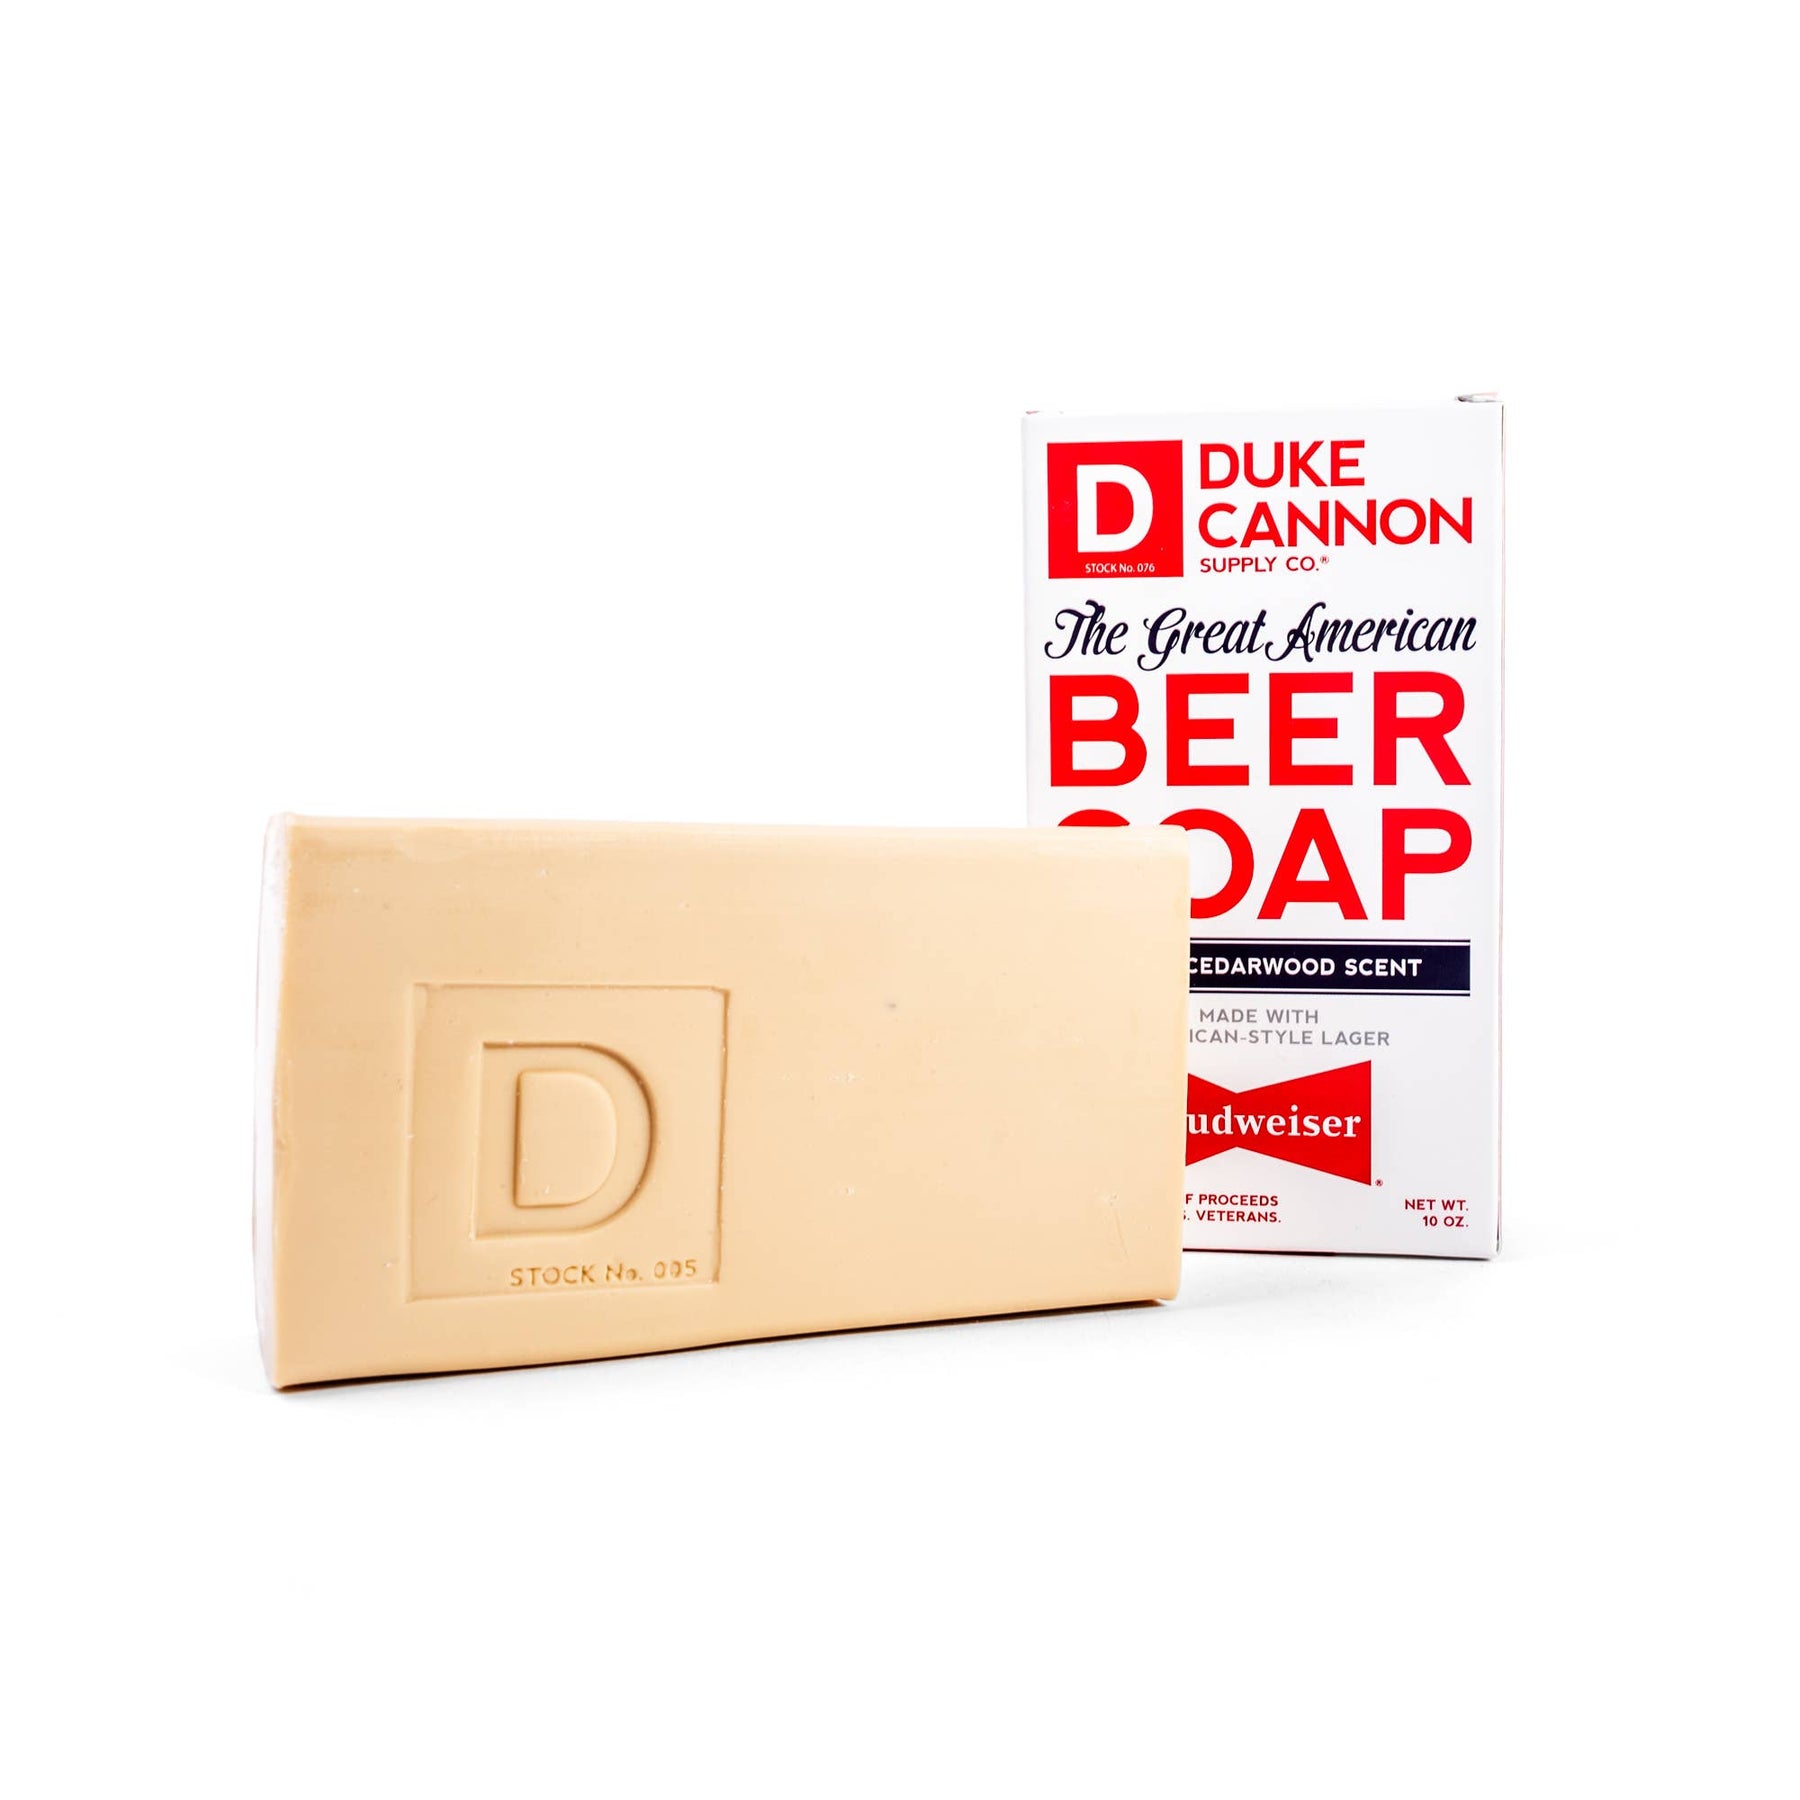 Duke Cannon The Great American Budweiser Beer Soap